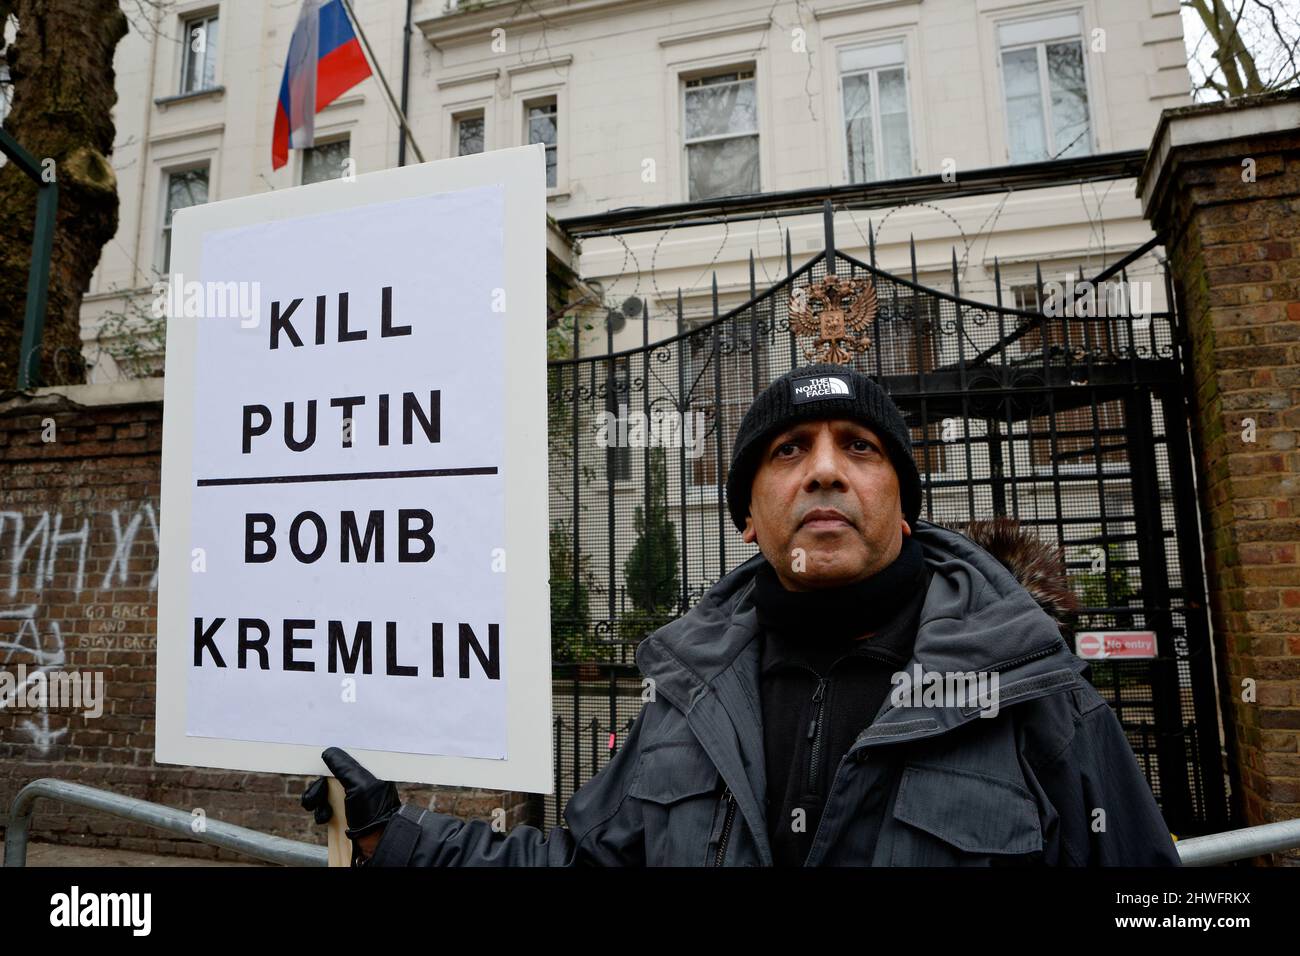 London (UK), 04.03.2022: Rolling- protests take place in front of the Russian Embassy against the war in Ukraine. Stock Photo